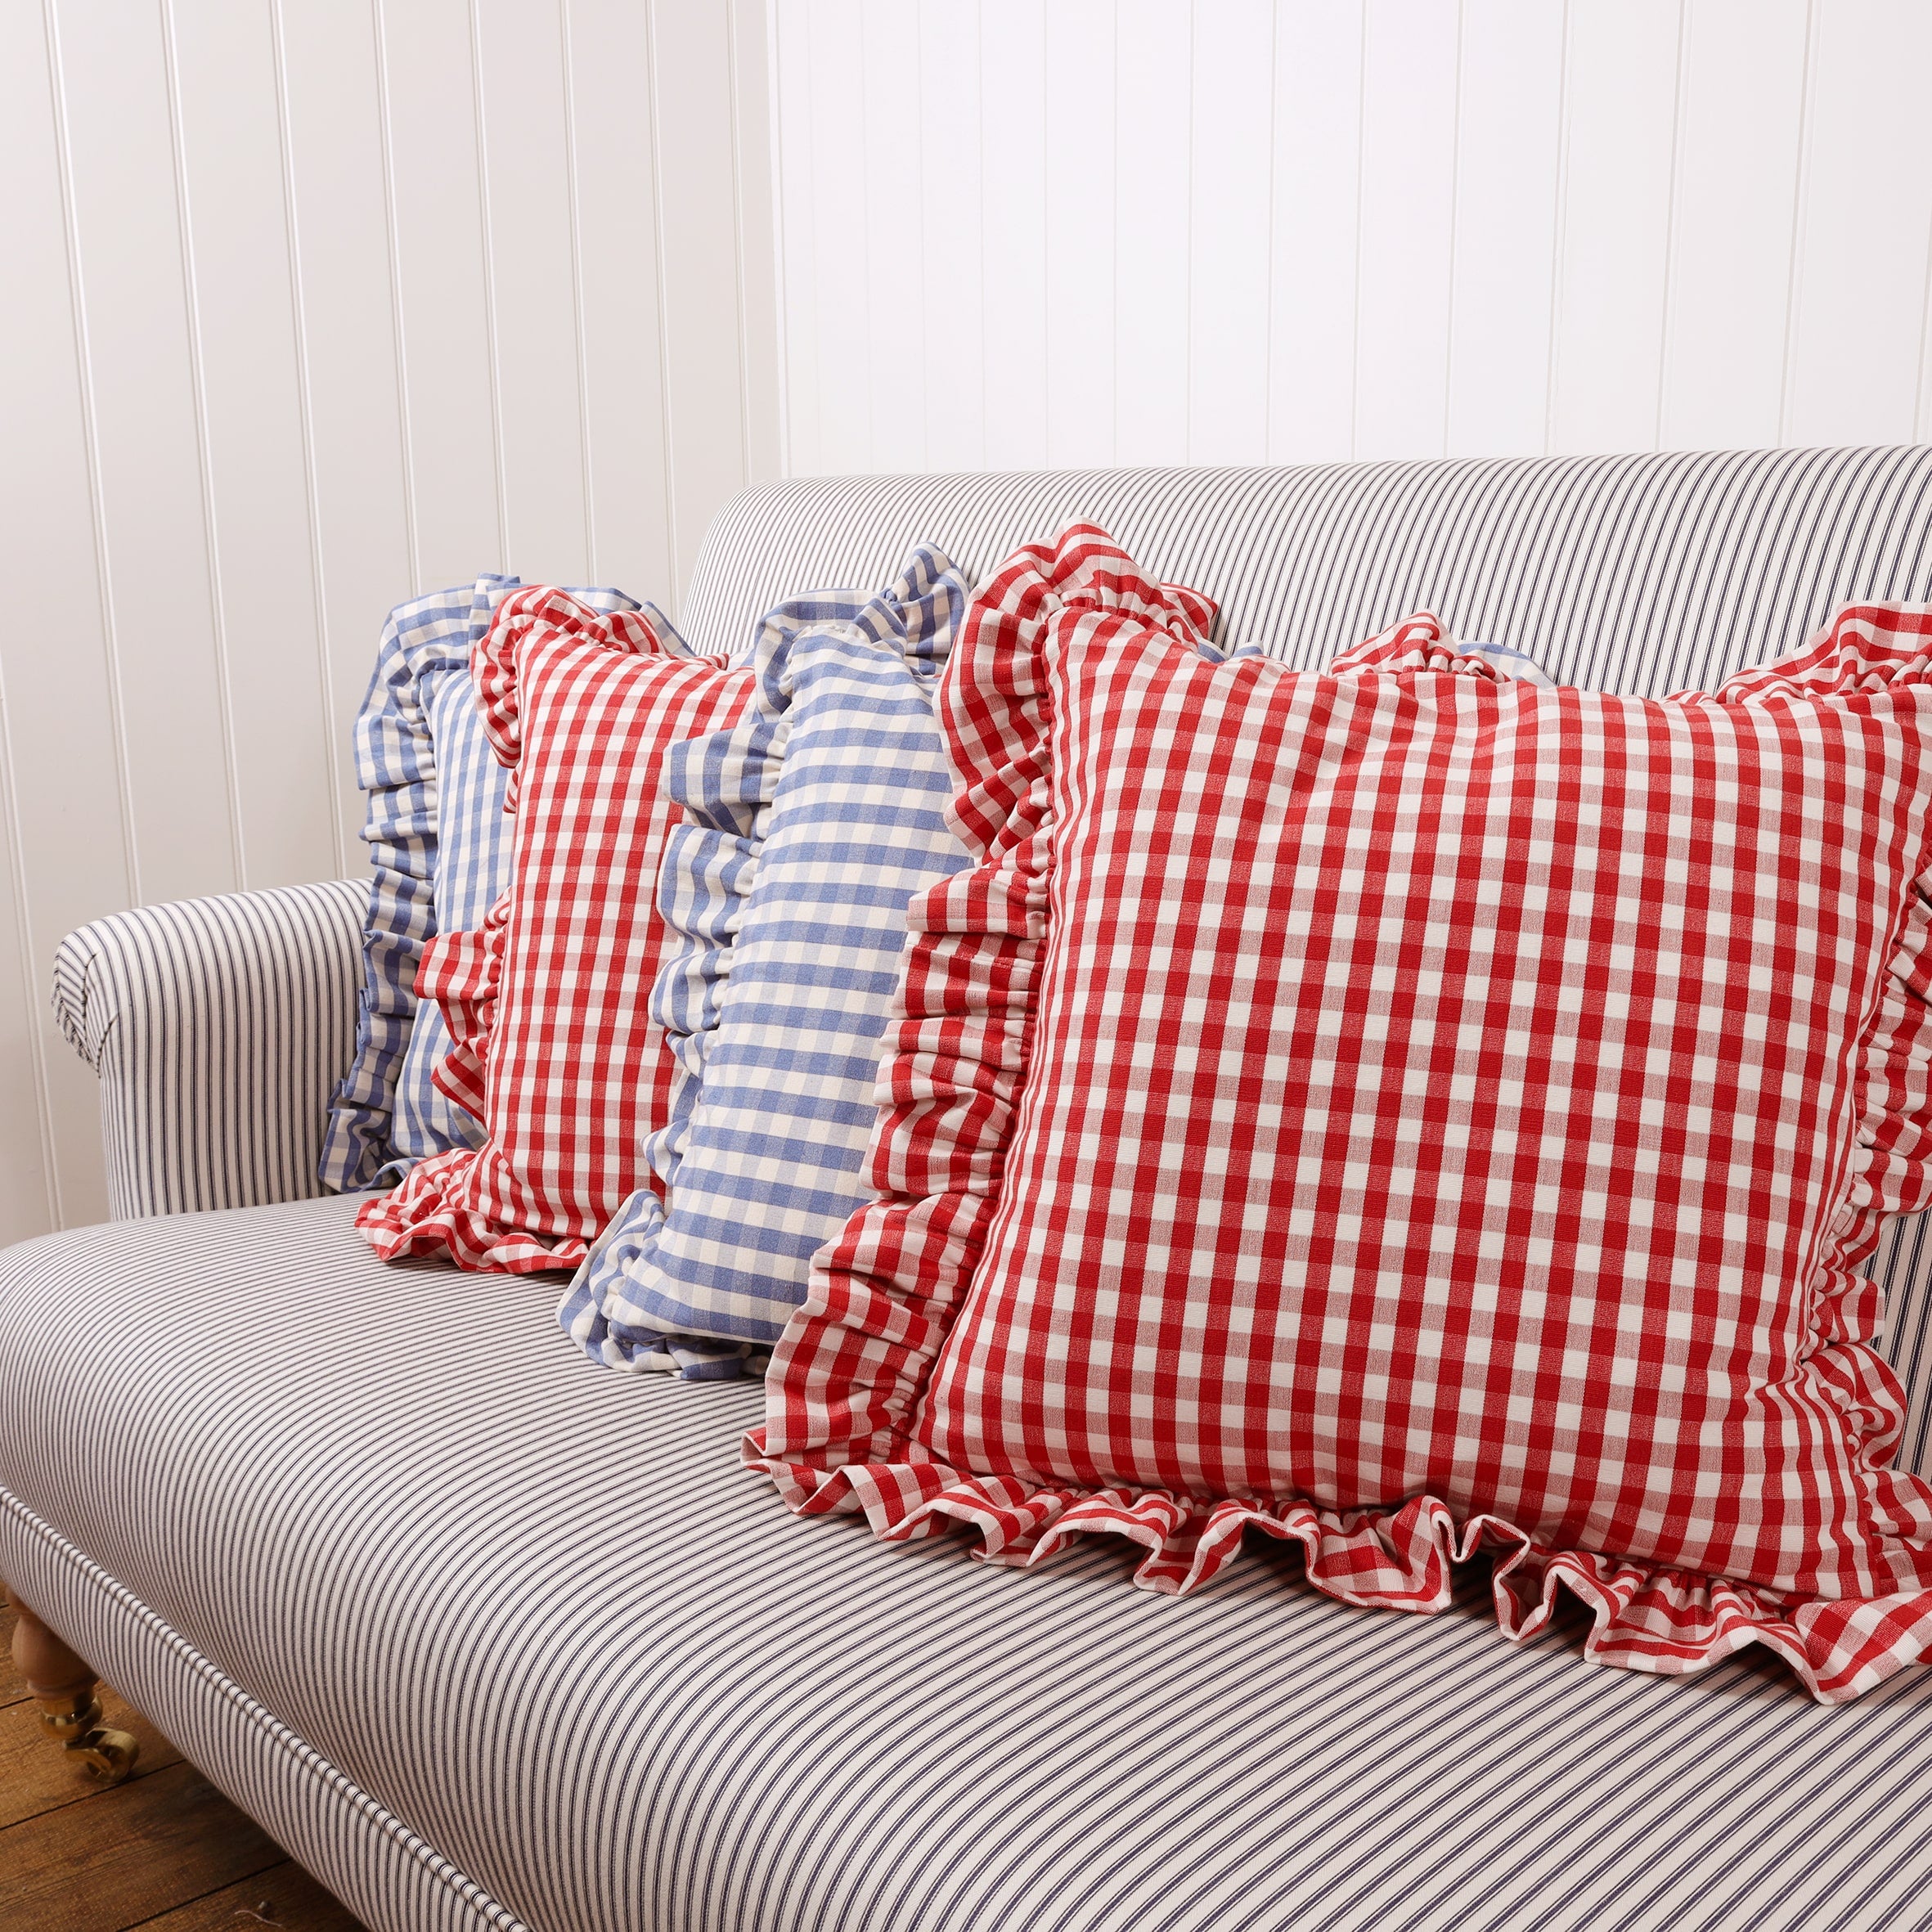 Red Gingham cushions and  blue gingham cushions placed in an alternate row on a navy stripe sofa